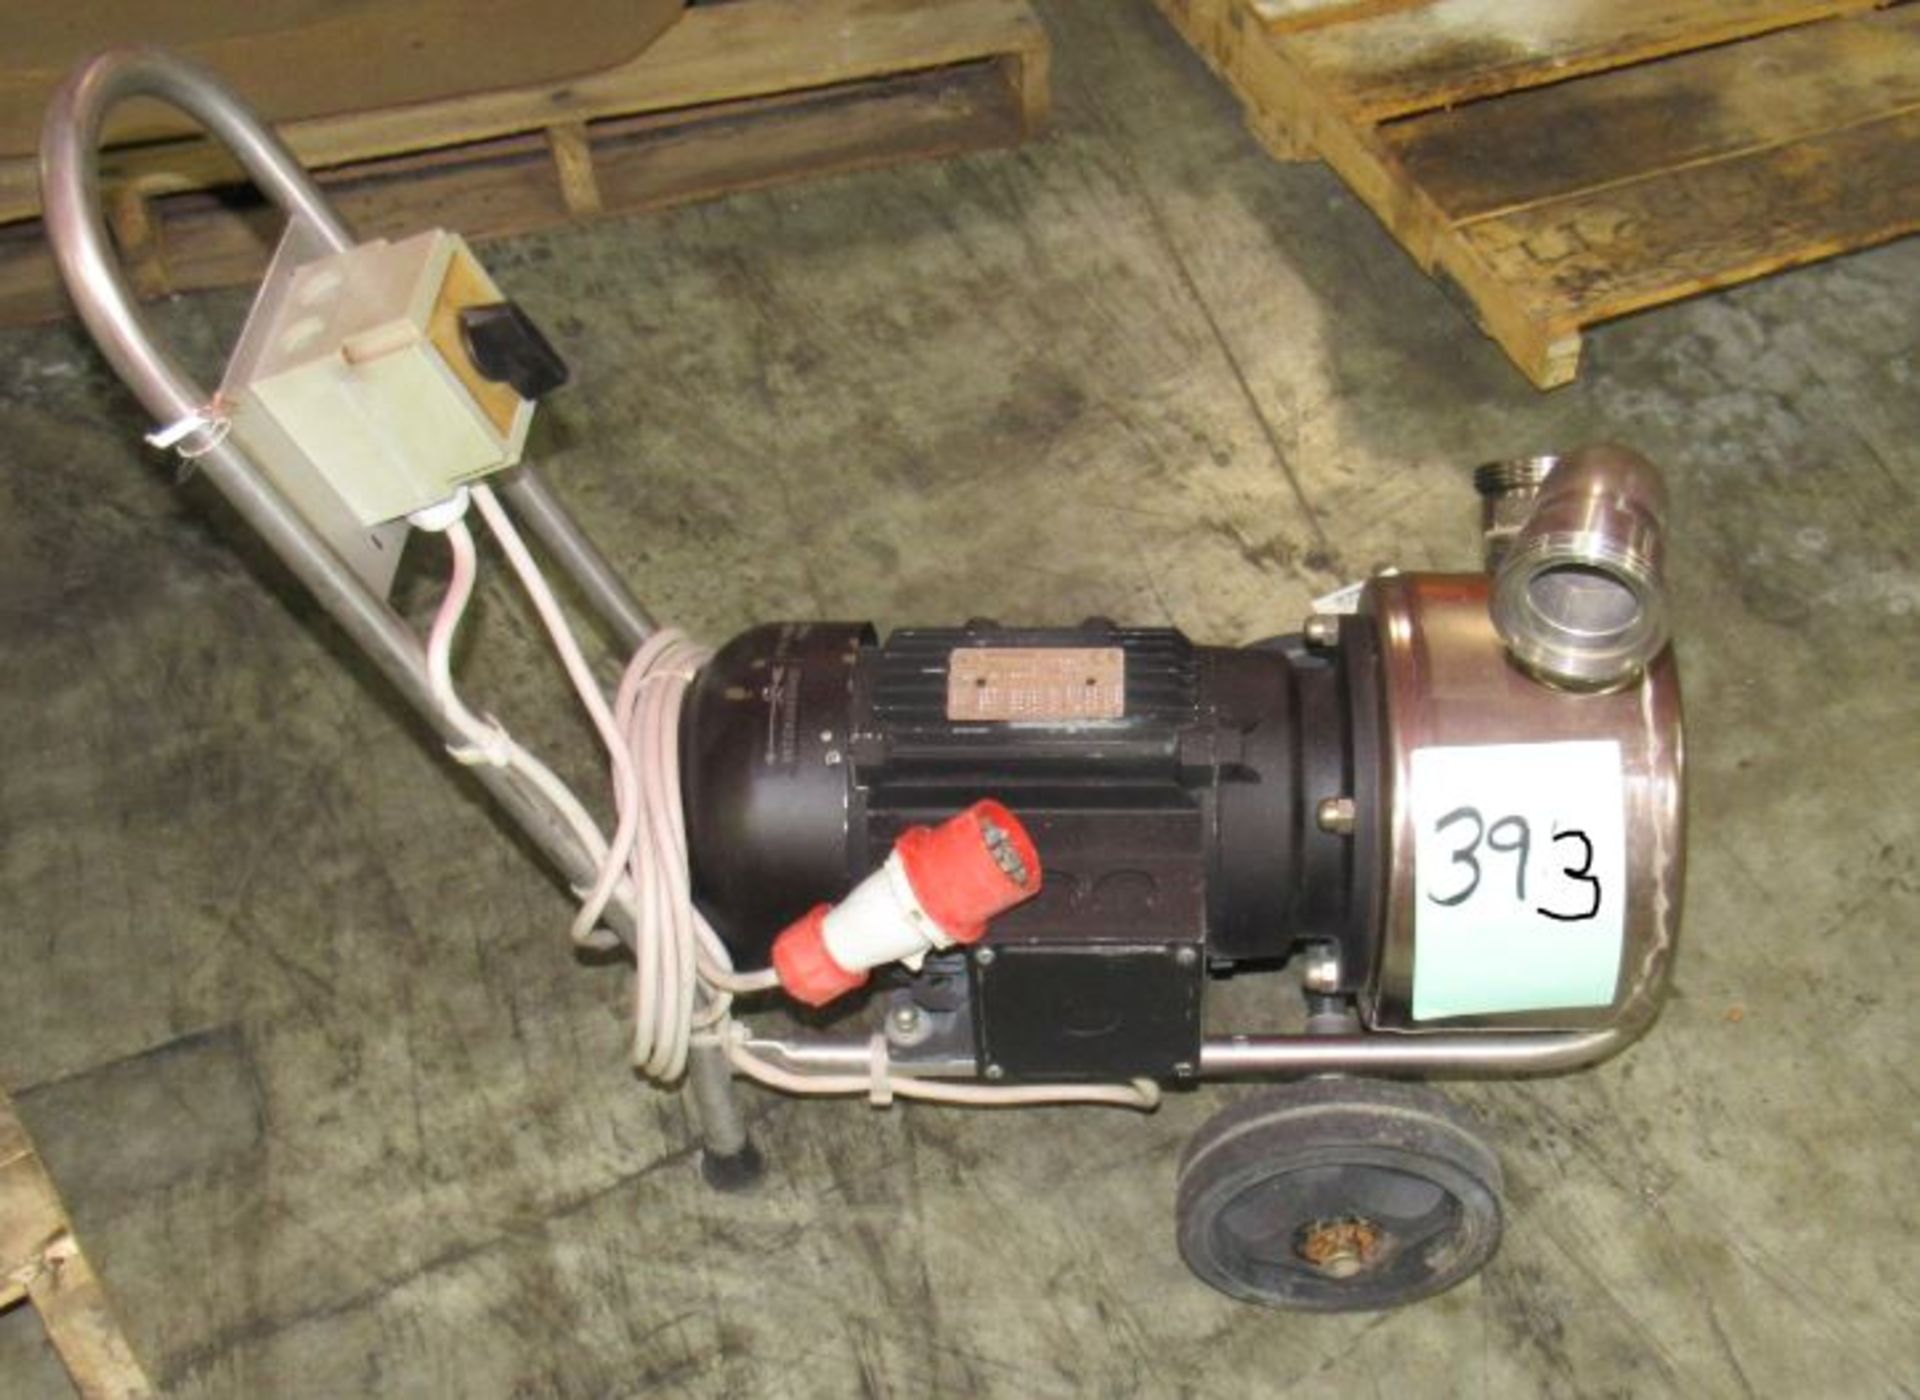 Portable Pump, Pacer Model P-58-1866 90 with 2" inlet and outlet, run with a Honda GC 160 Gas Engine